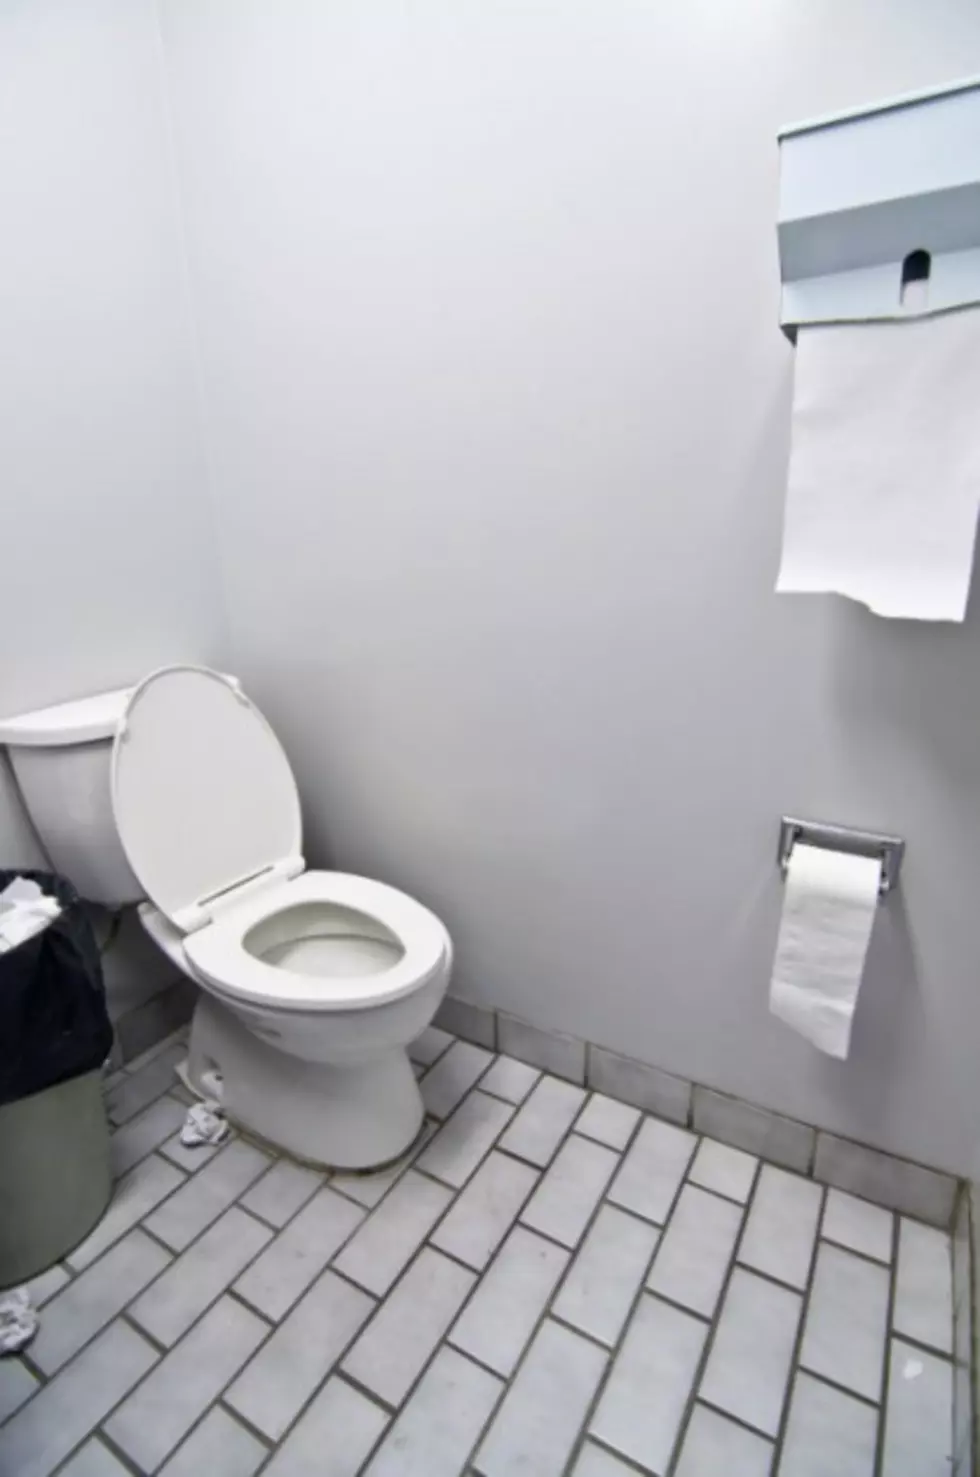 Toilet Paper On The Roll &#8211; Under Or Over?